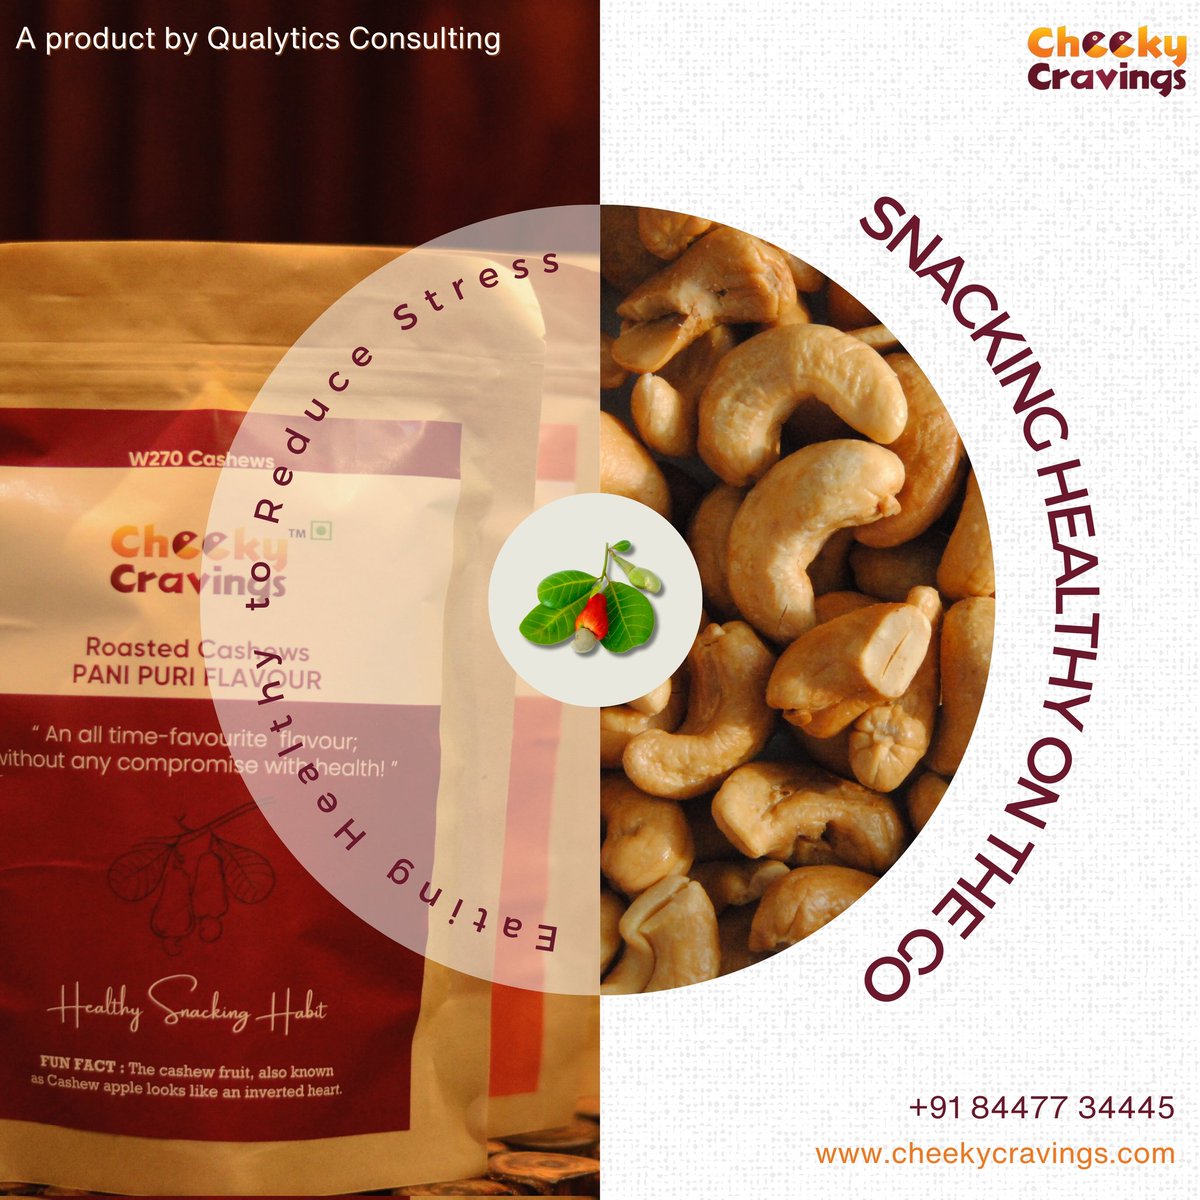 Make every bite count with Cheeky Cravings' roasted cashews – the ideal snack for those who choose healthy over junk.

Healthy Snacking Habit 💌

#HealthyHabit #SnackWithPurpose #CheekyCravings #roastedcashews #delhi